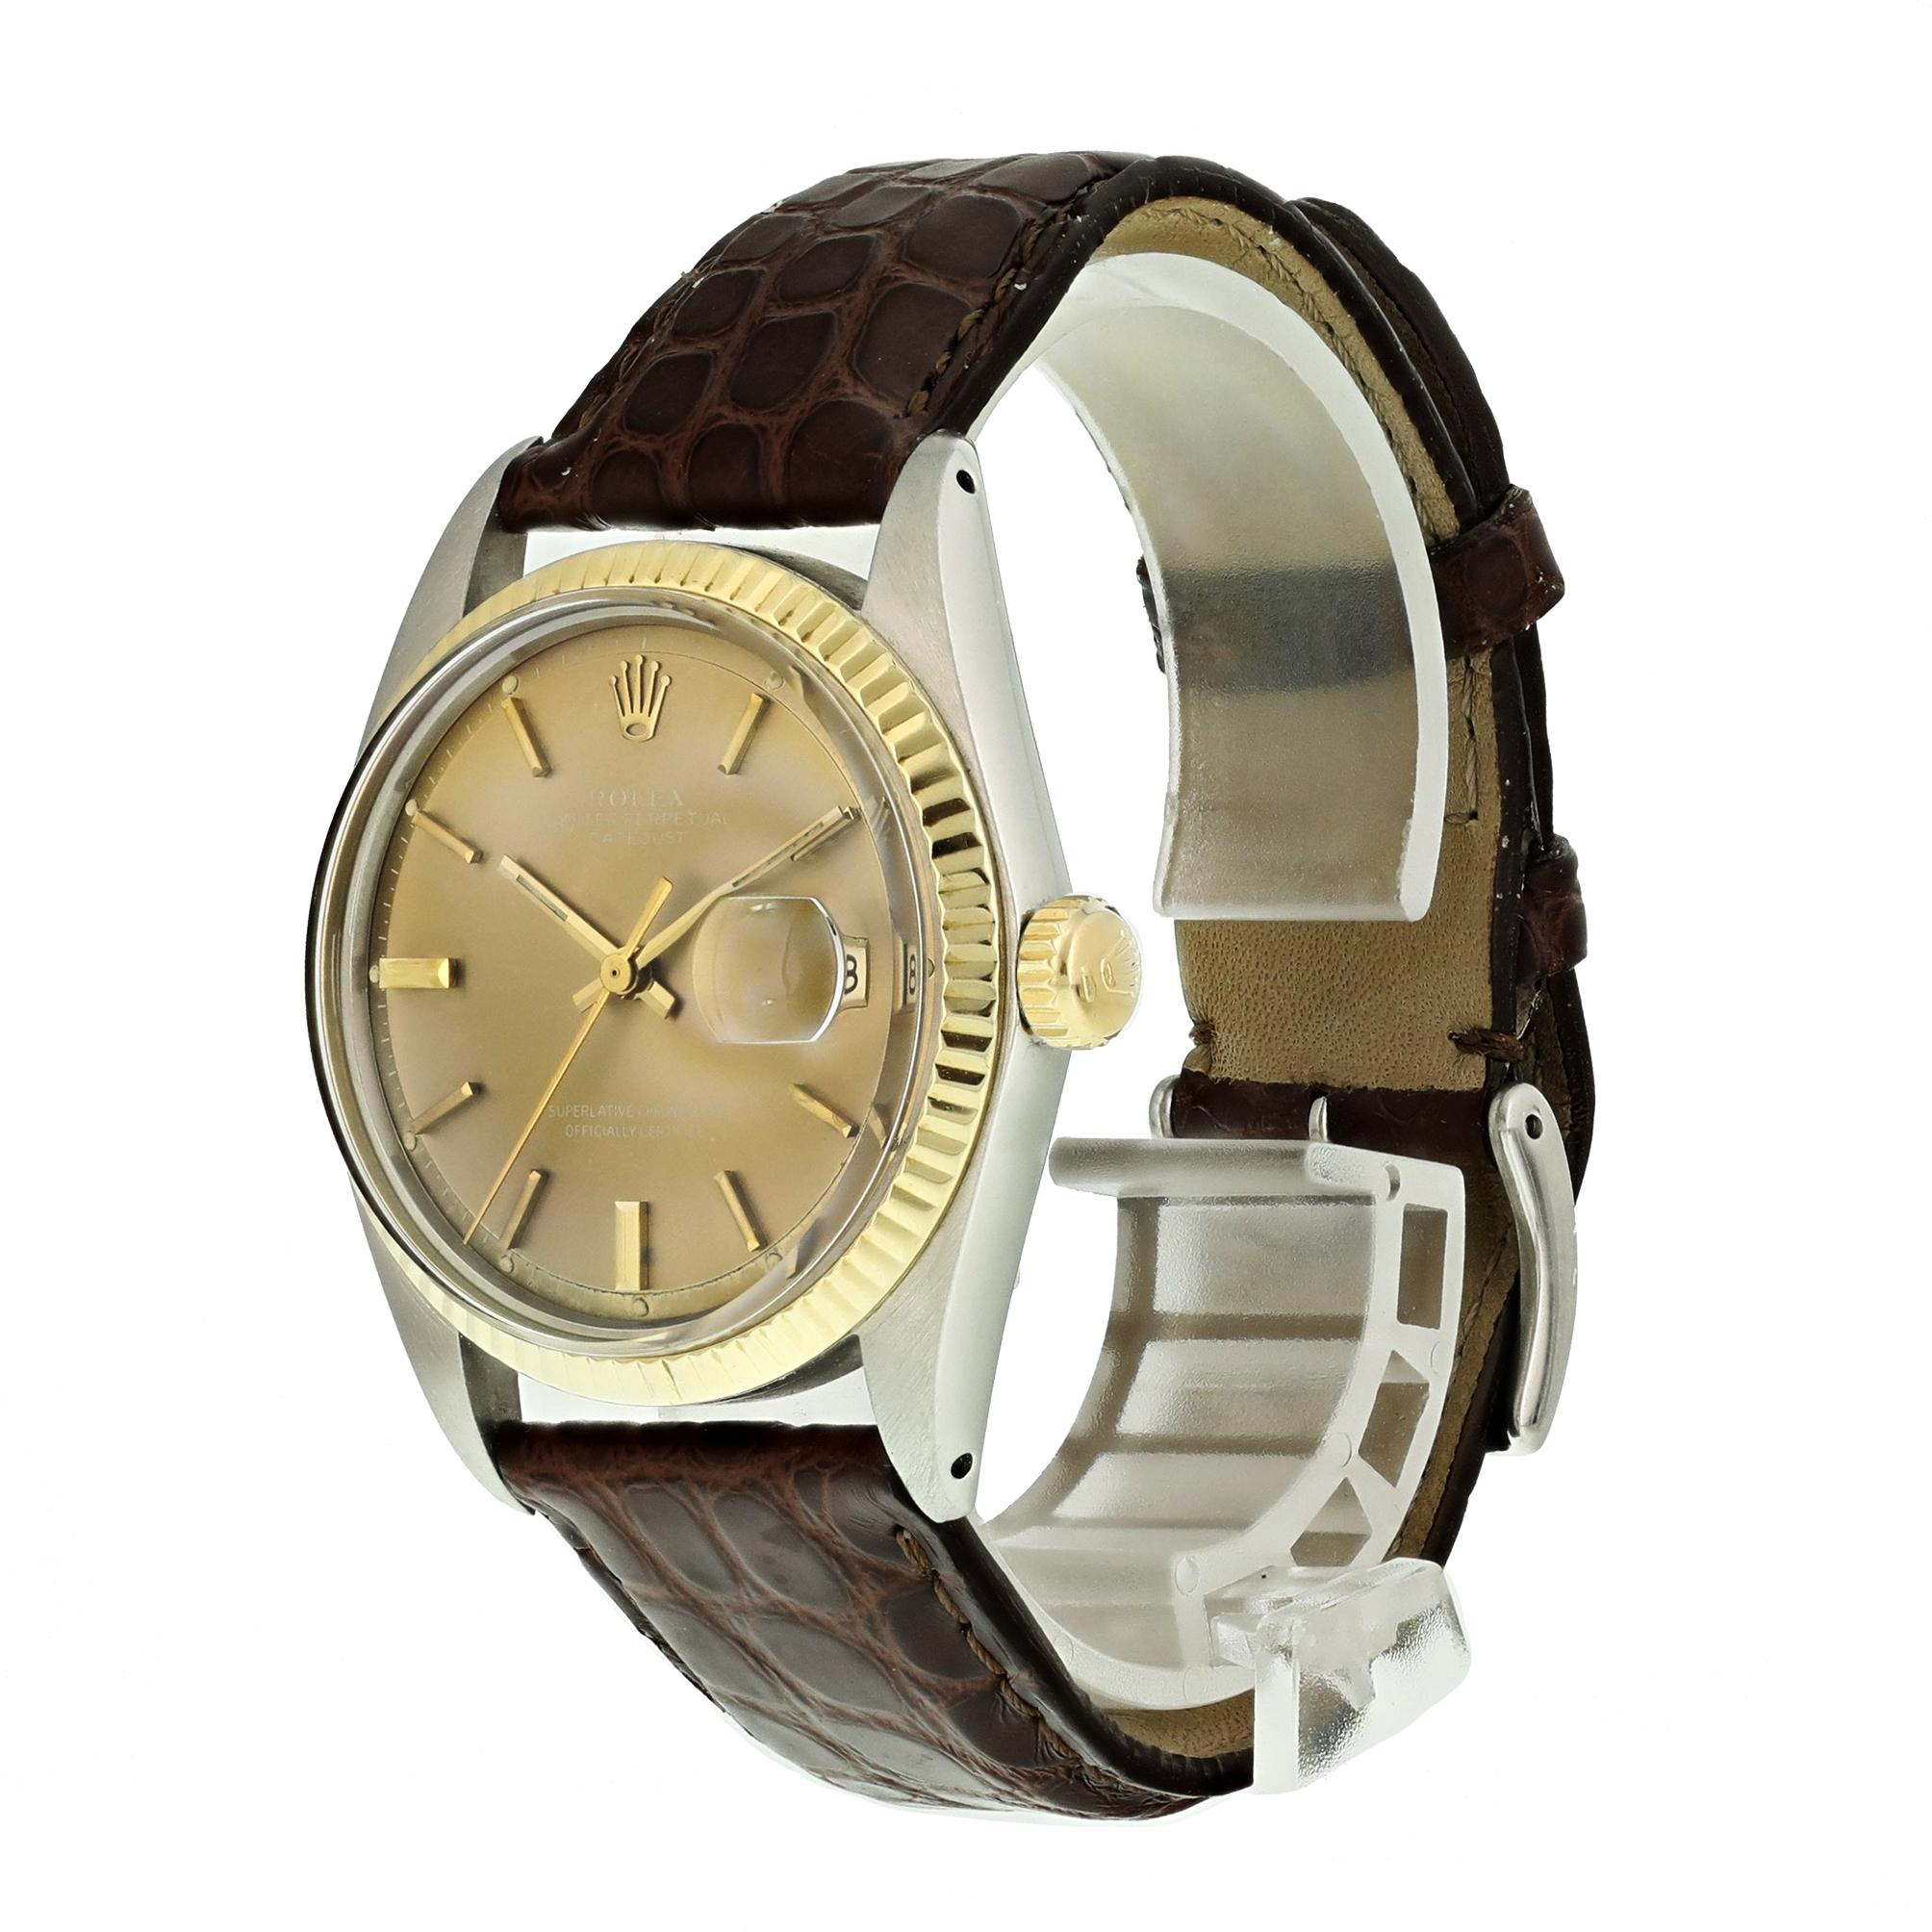 Rolex Datejust 1601 Mens Watch. 
36mm Stainless Steel case. 
Yellow Gold fluted bezel. 
Bronze dial with gold hands and index hour markers. 
Minute markers on the outer dial. 
Date display at the 3 o'clock position. 
Two Tone Stainless Steel Jubilee